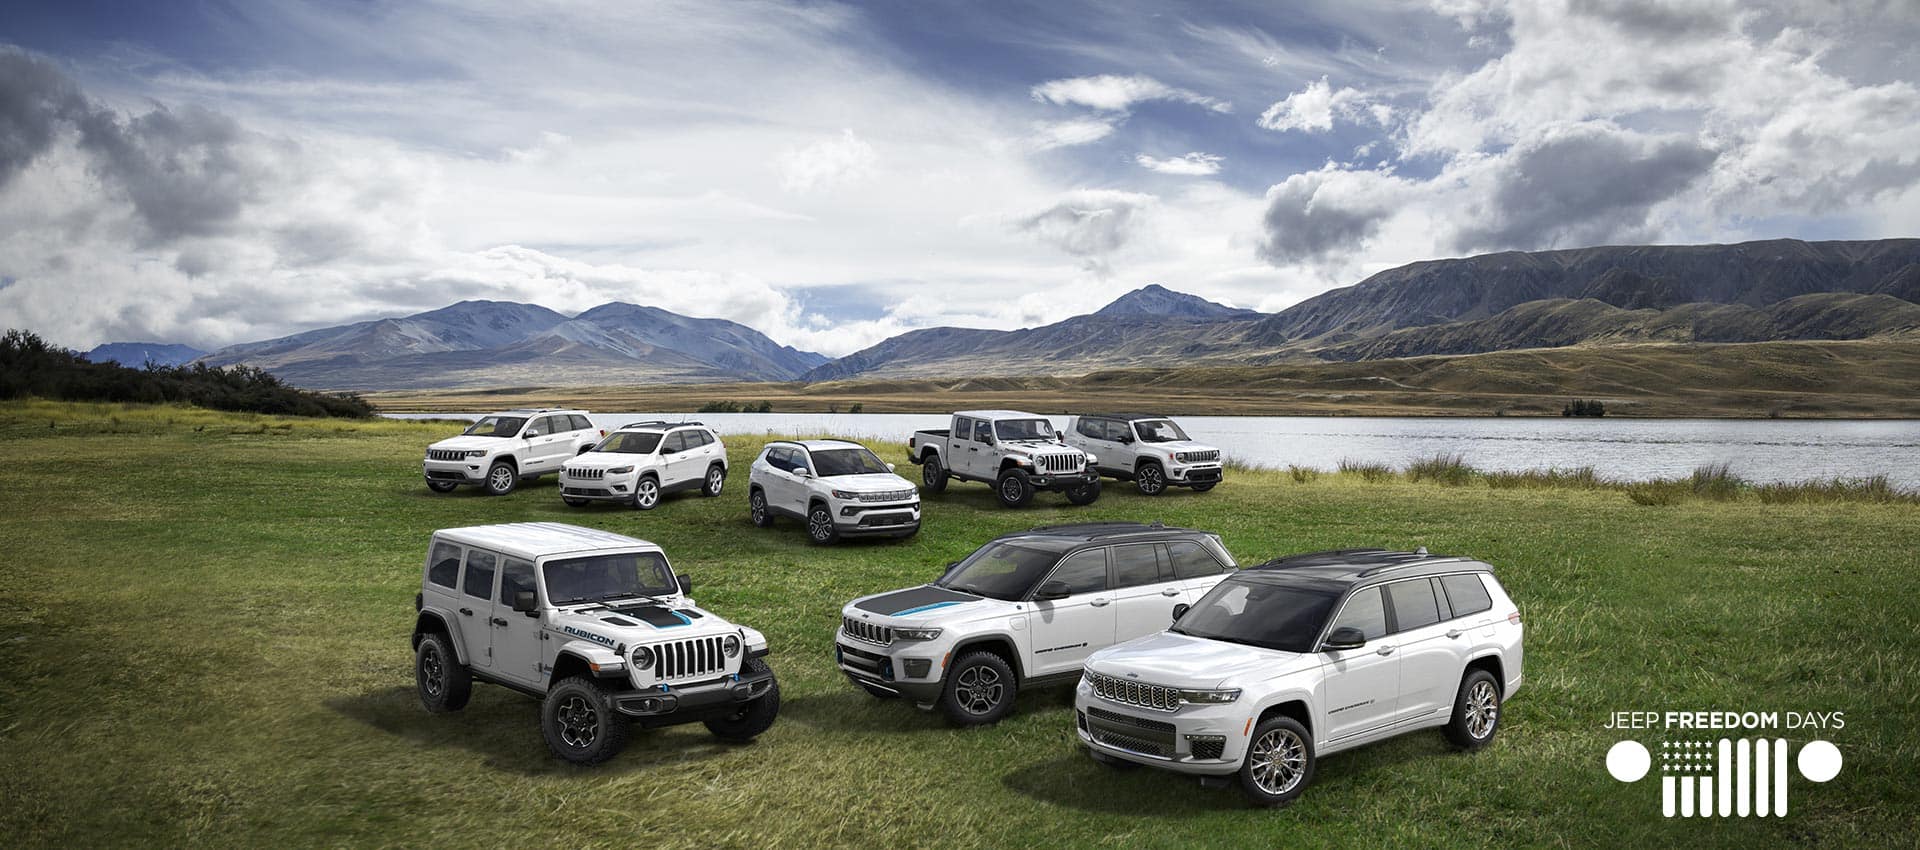 The 2022 Jeep Brand lineup parked beside a lake with mountains in the background. Front row: the Wrangler Unlimited Rubicon 4xe, Grand Cherokee 4xe Trailhawk and Grand Cherokee L. Back row: Grand Cherokee WK Limited, Cherokee Limited, Compass Limited, Gladiator Rubicon and Renegade Limited. The Jeep Freedom Days Logo.